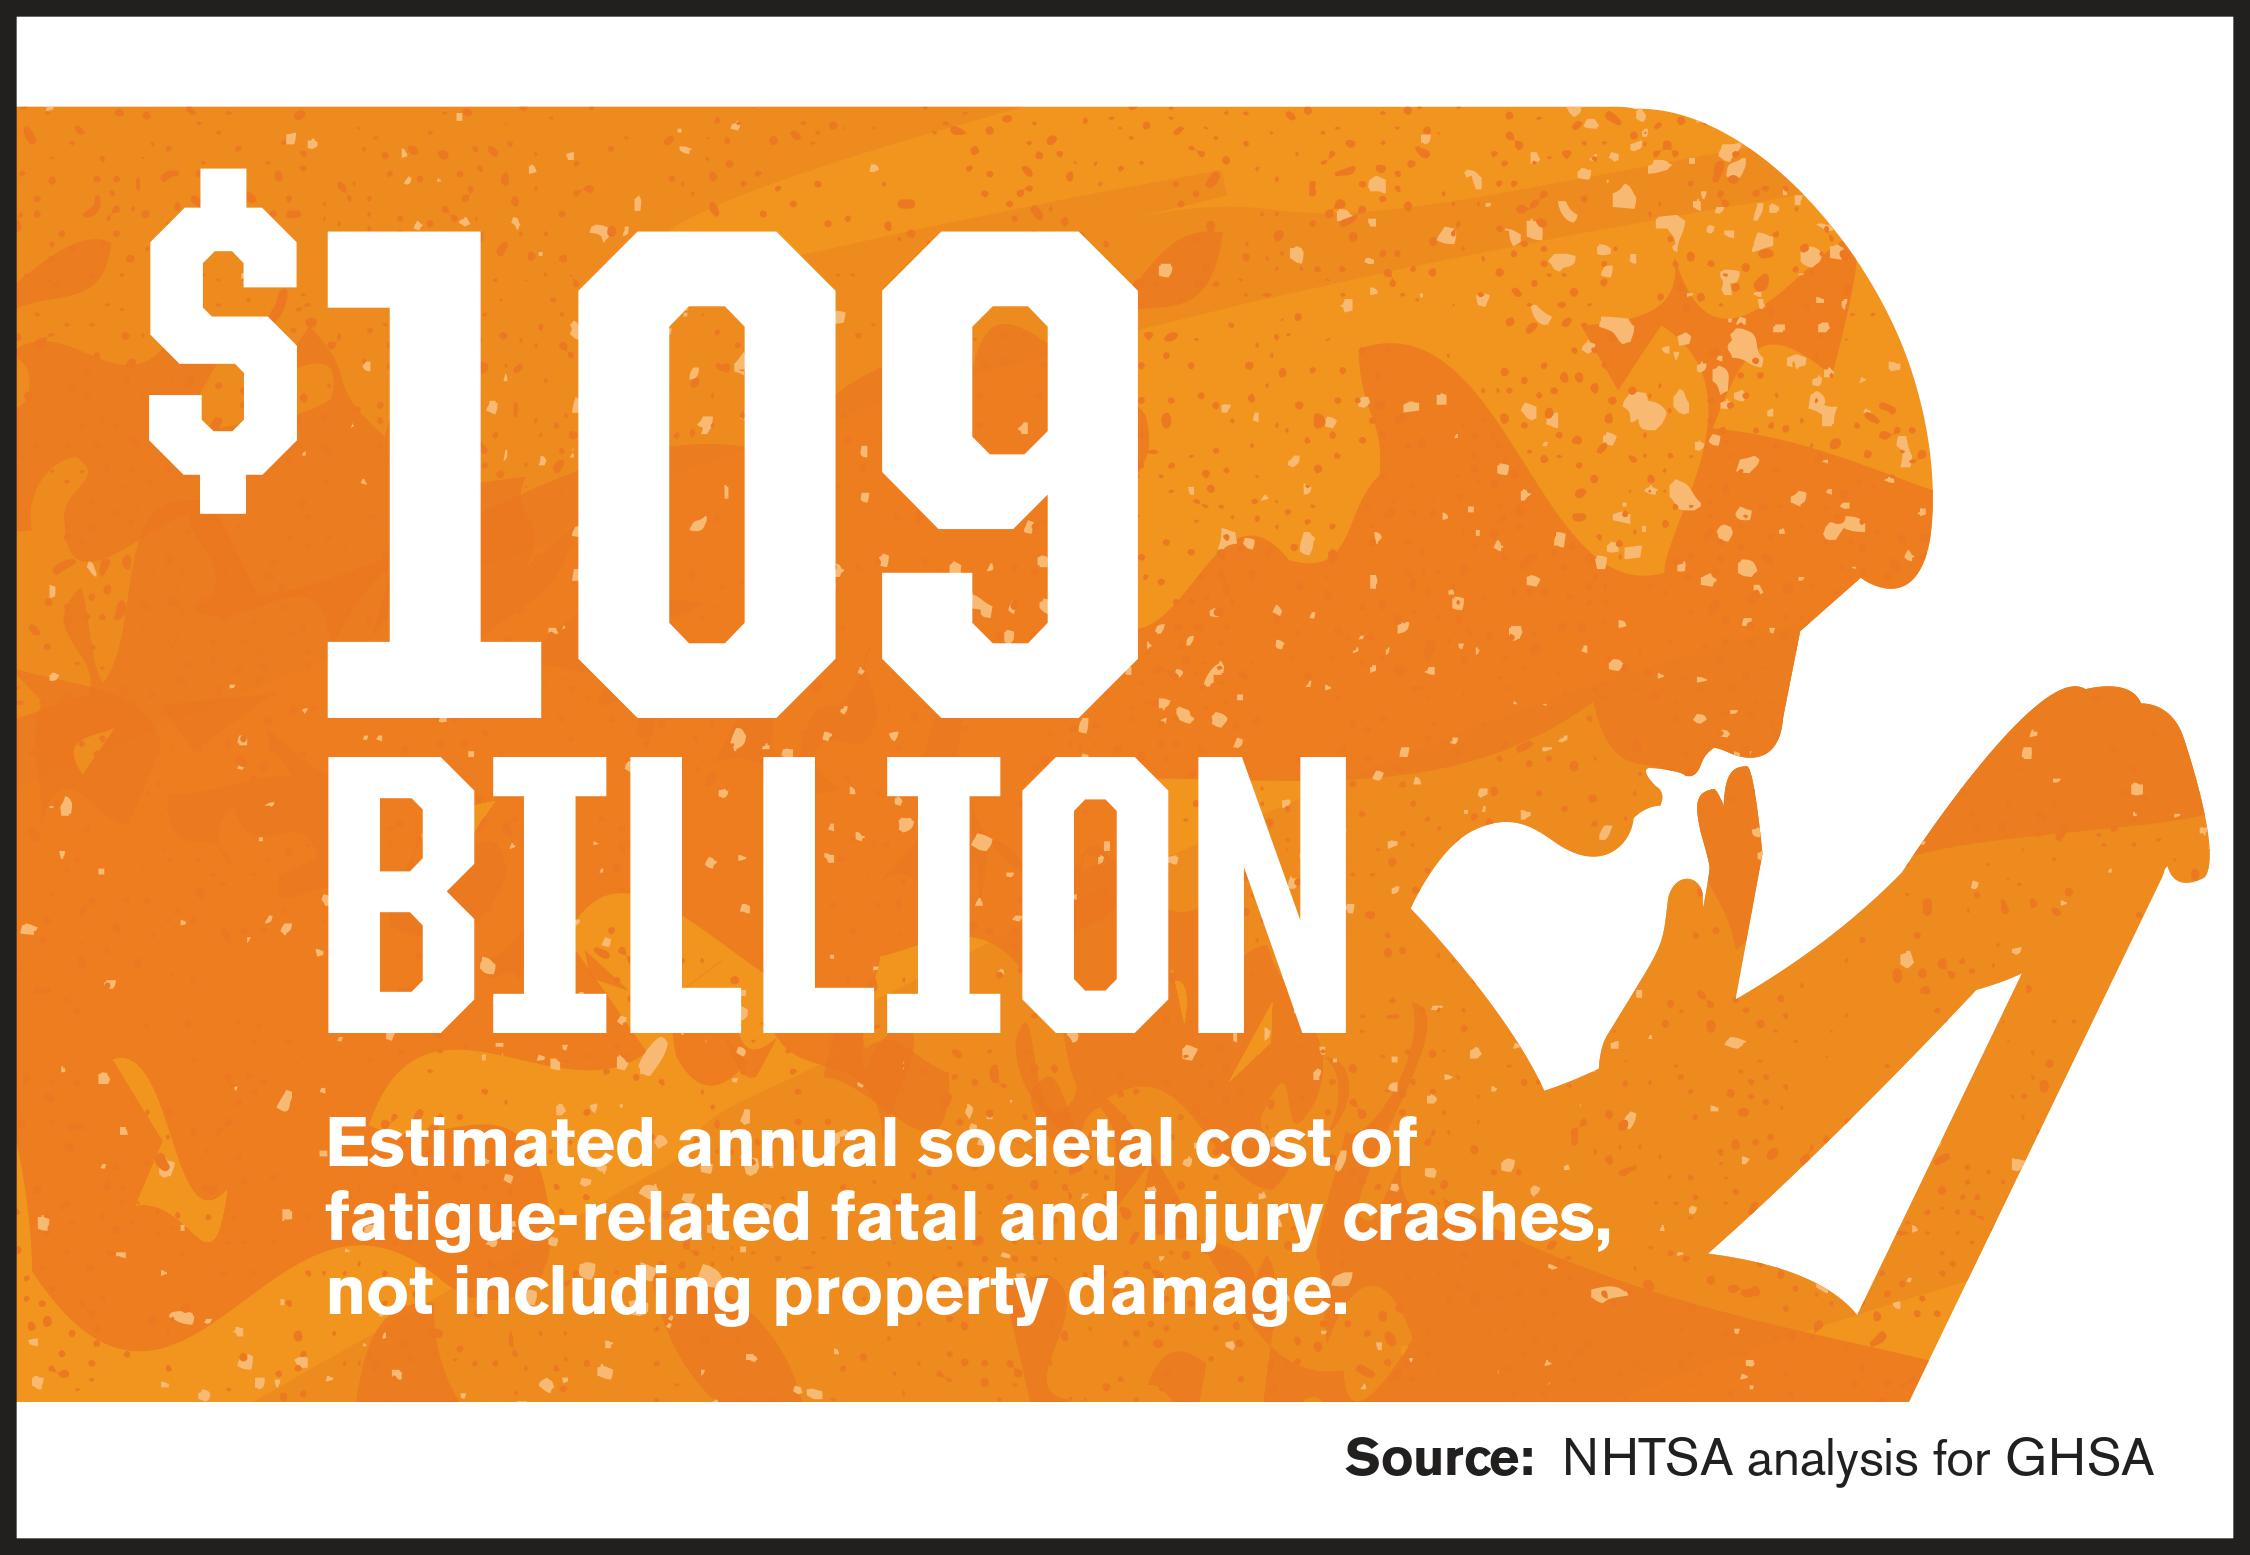 Estimated Annual Social Cost of Fatigued-Related Fatal and Injury Crashes